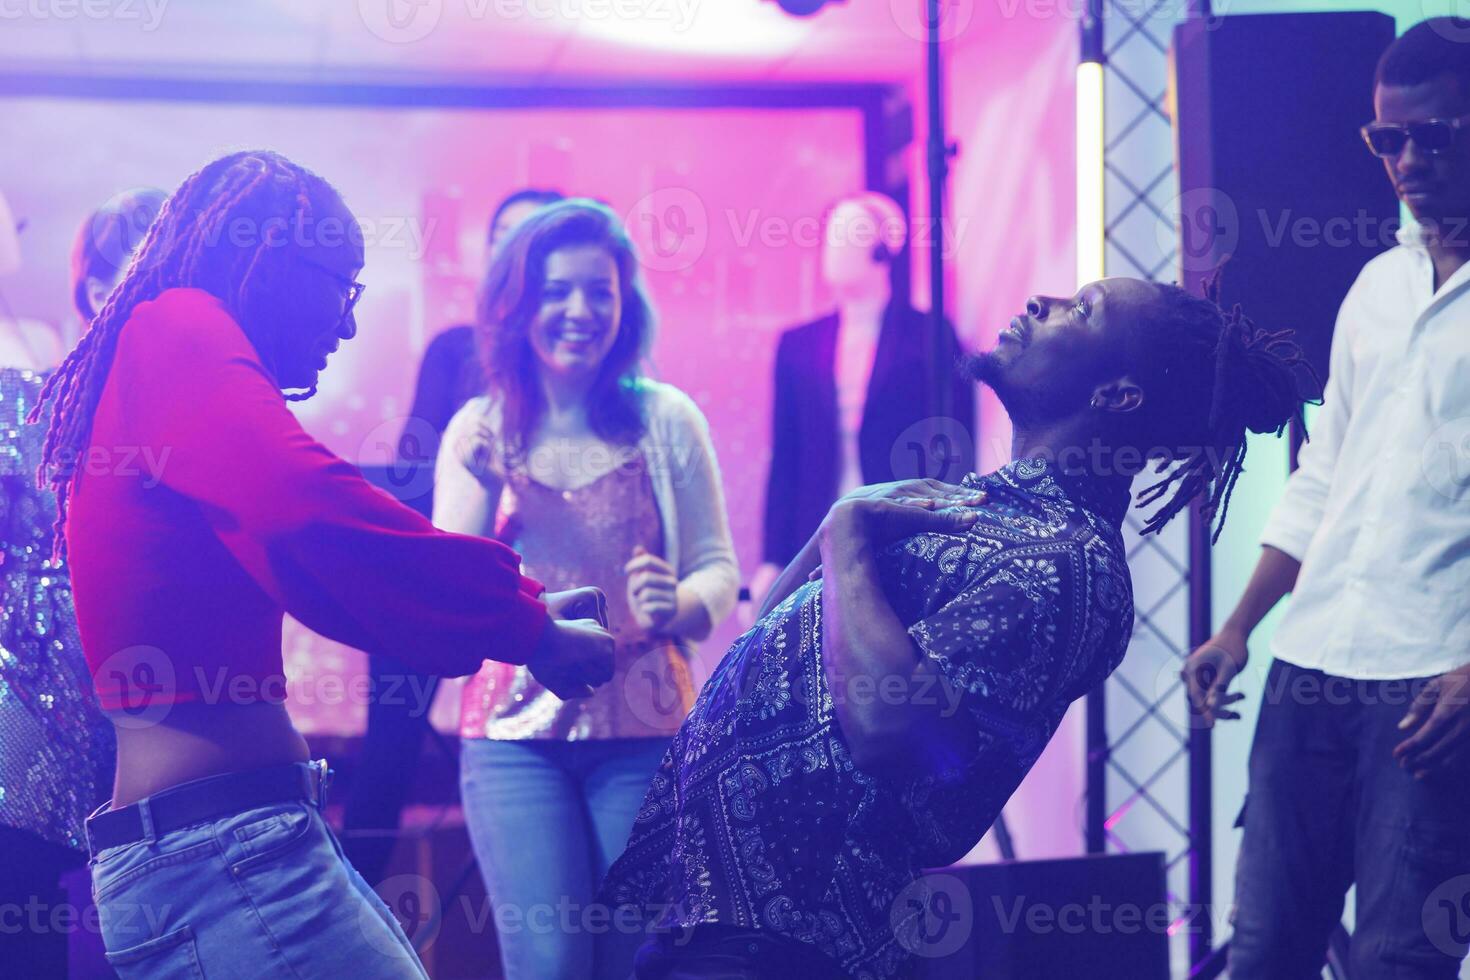 Couple improvising dance battle while clubbing and partying in nightclub. African american man and woman showing moves on dancefloor while having fun at discotheque social gathering photo